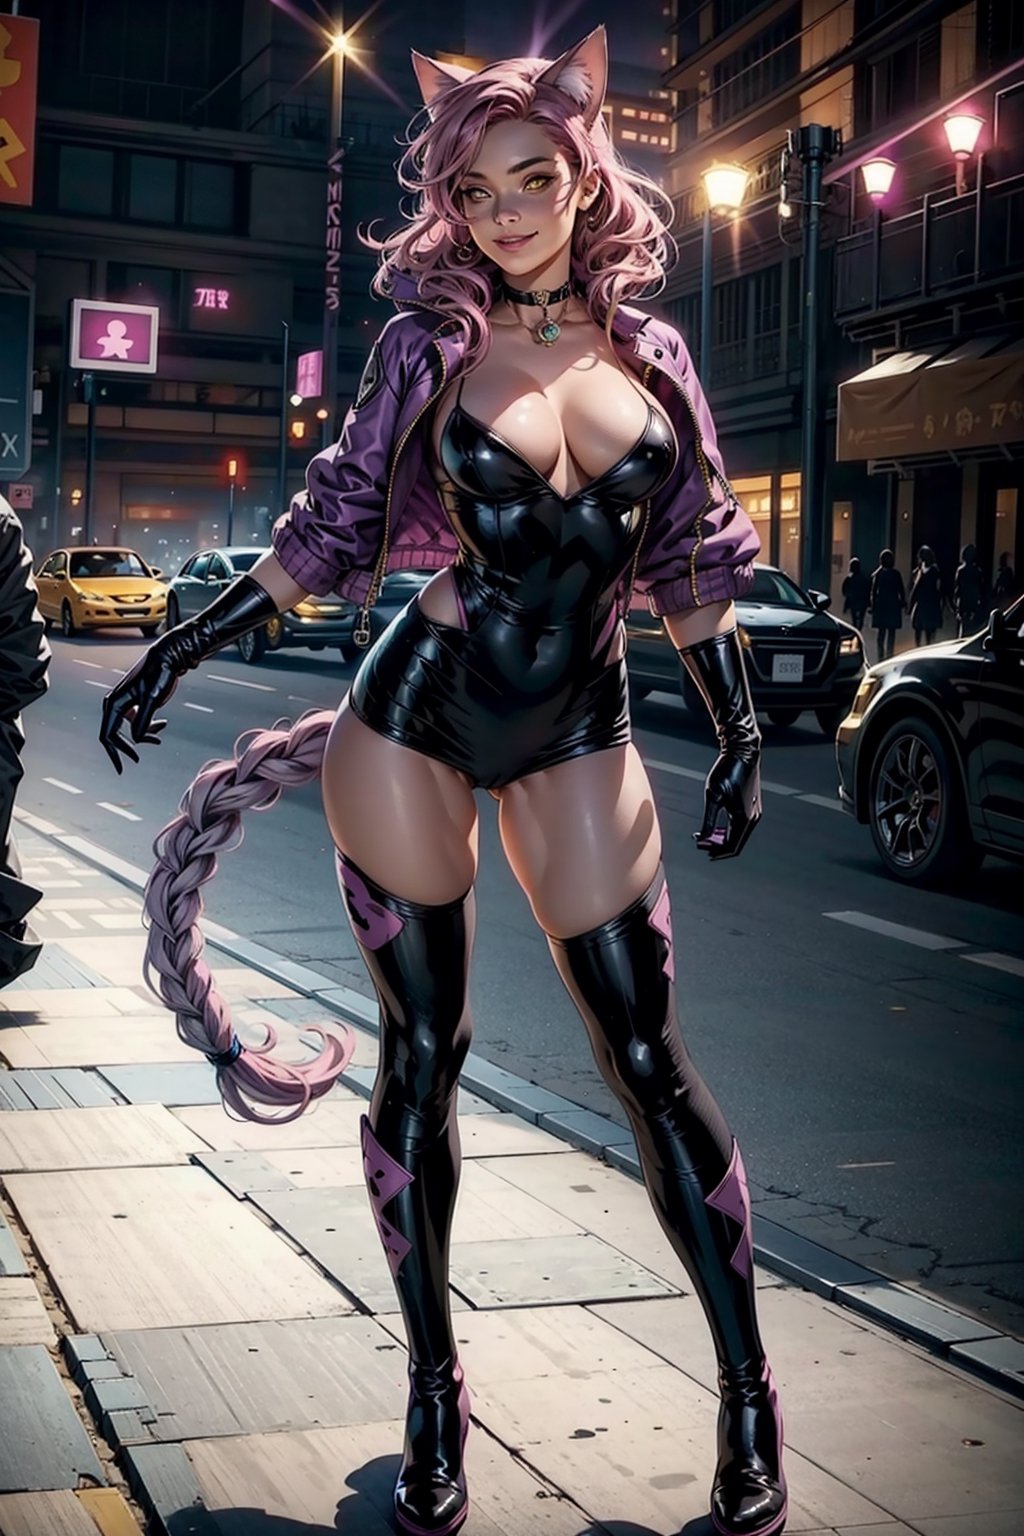 1girl,  athletic, purple dress:1.2, pink hair:1.2, yellow eyes:1.2, pink cat ears:1.2, black leather boots, black leather gloves, smiling,braids,make up,chocker,cleavage,voluminous lighting, Best Quality, Masterpiece, intricate details, tonemapping, sharp-focus, hyper detailed, Trending on ArtStation, manga,(full_body:1.4)